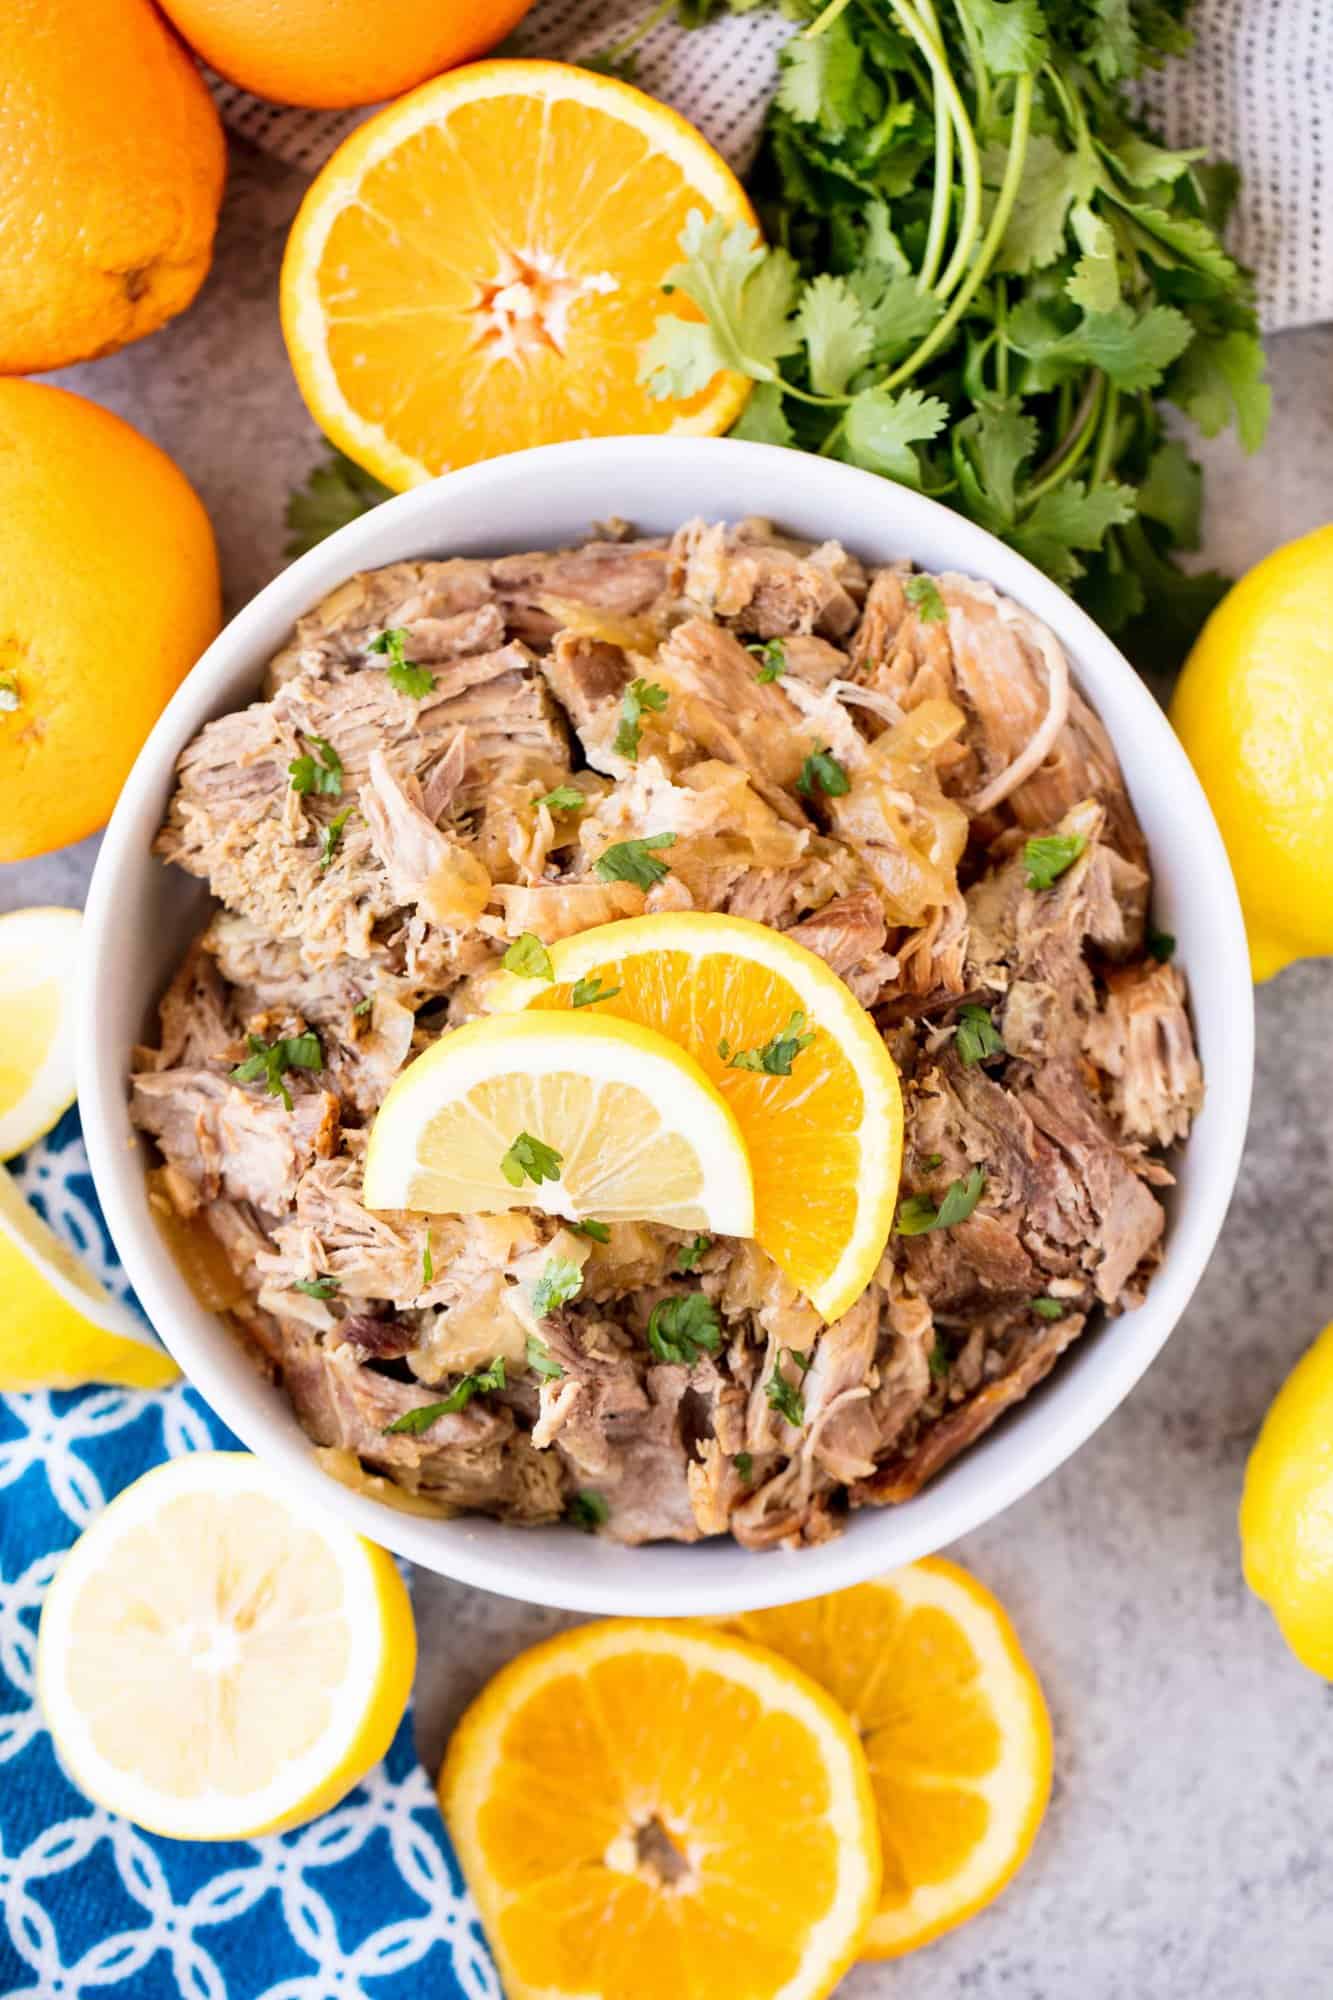 Slow Cooker Cuban Mojo Pork is tender shredded pork, slow cooked in a garlic citrus sauce. Serve it up on some toasted bread for a delicious Cuban sandwich or plain with rice and beans.